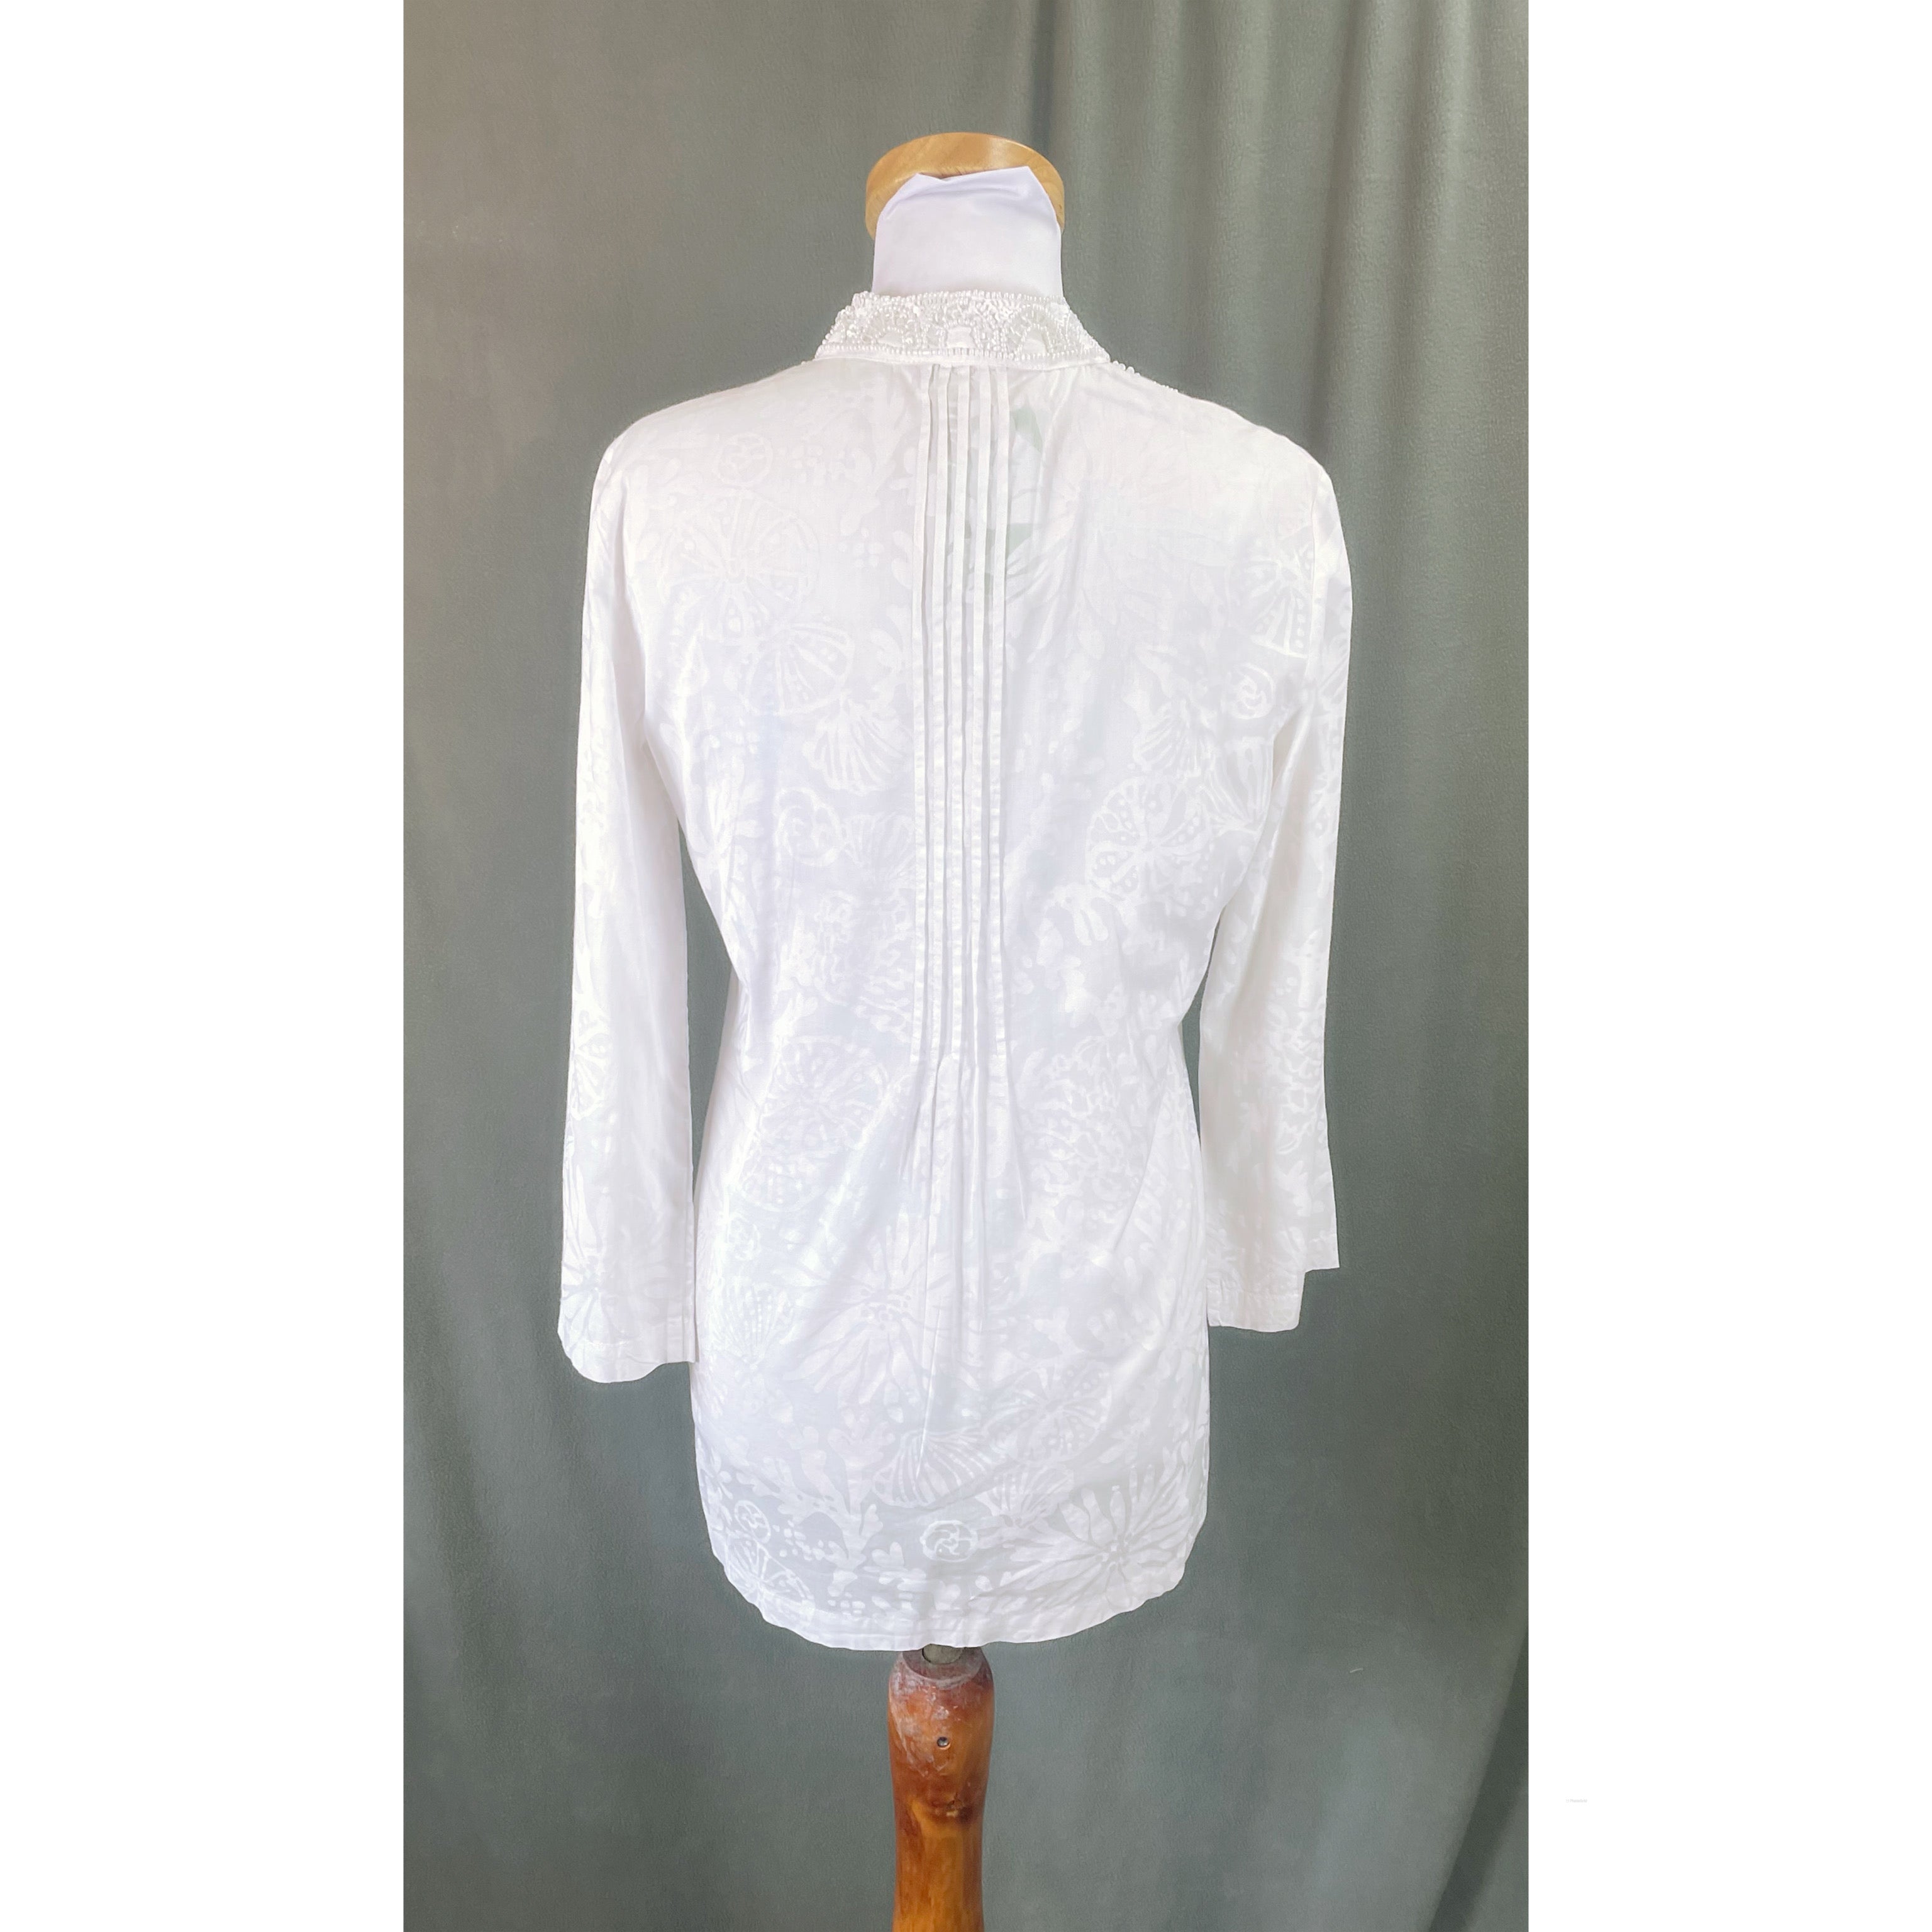 Lilly Pulitzer white beaded Sarasota tunic, size S, NEW WITH TAGS!